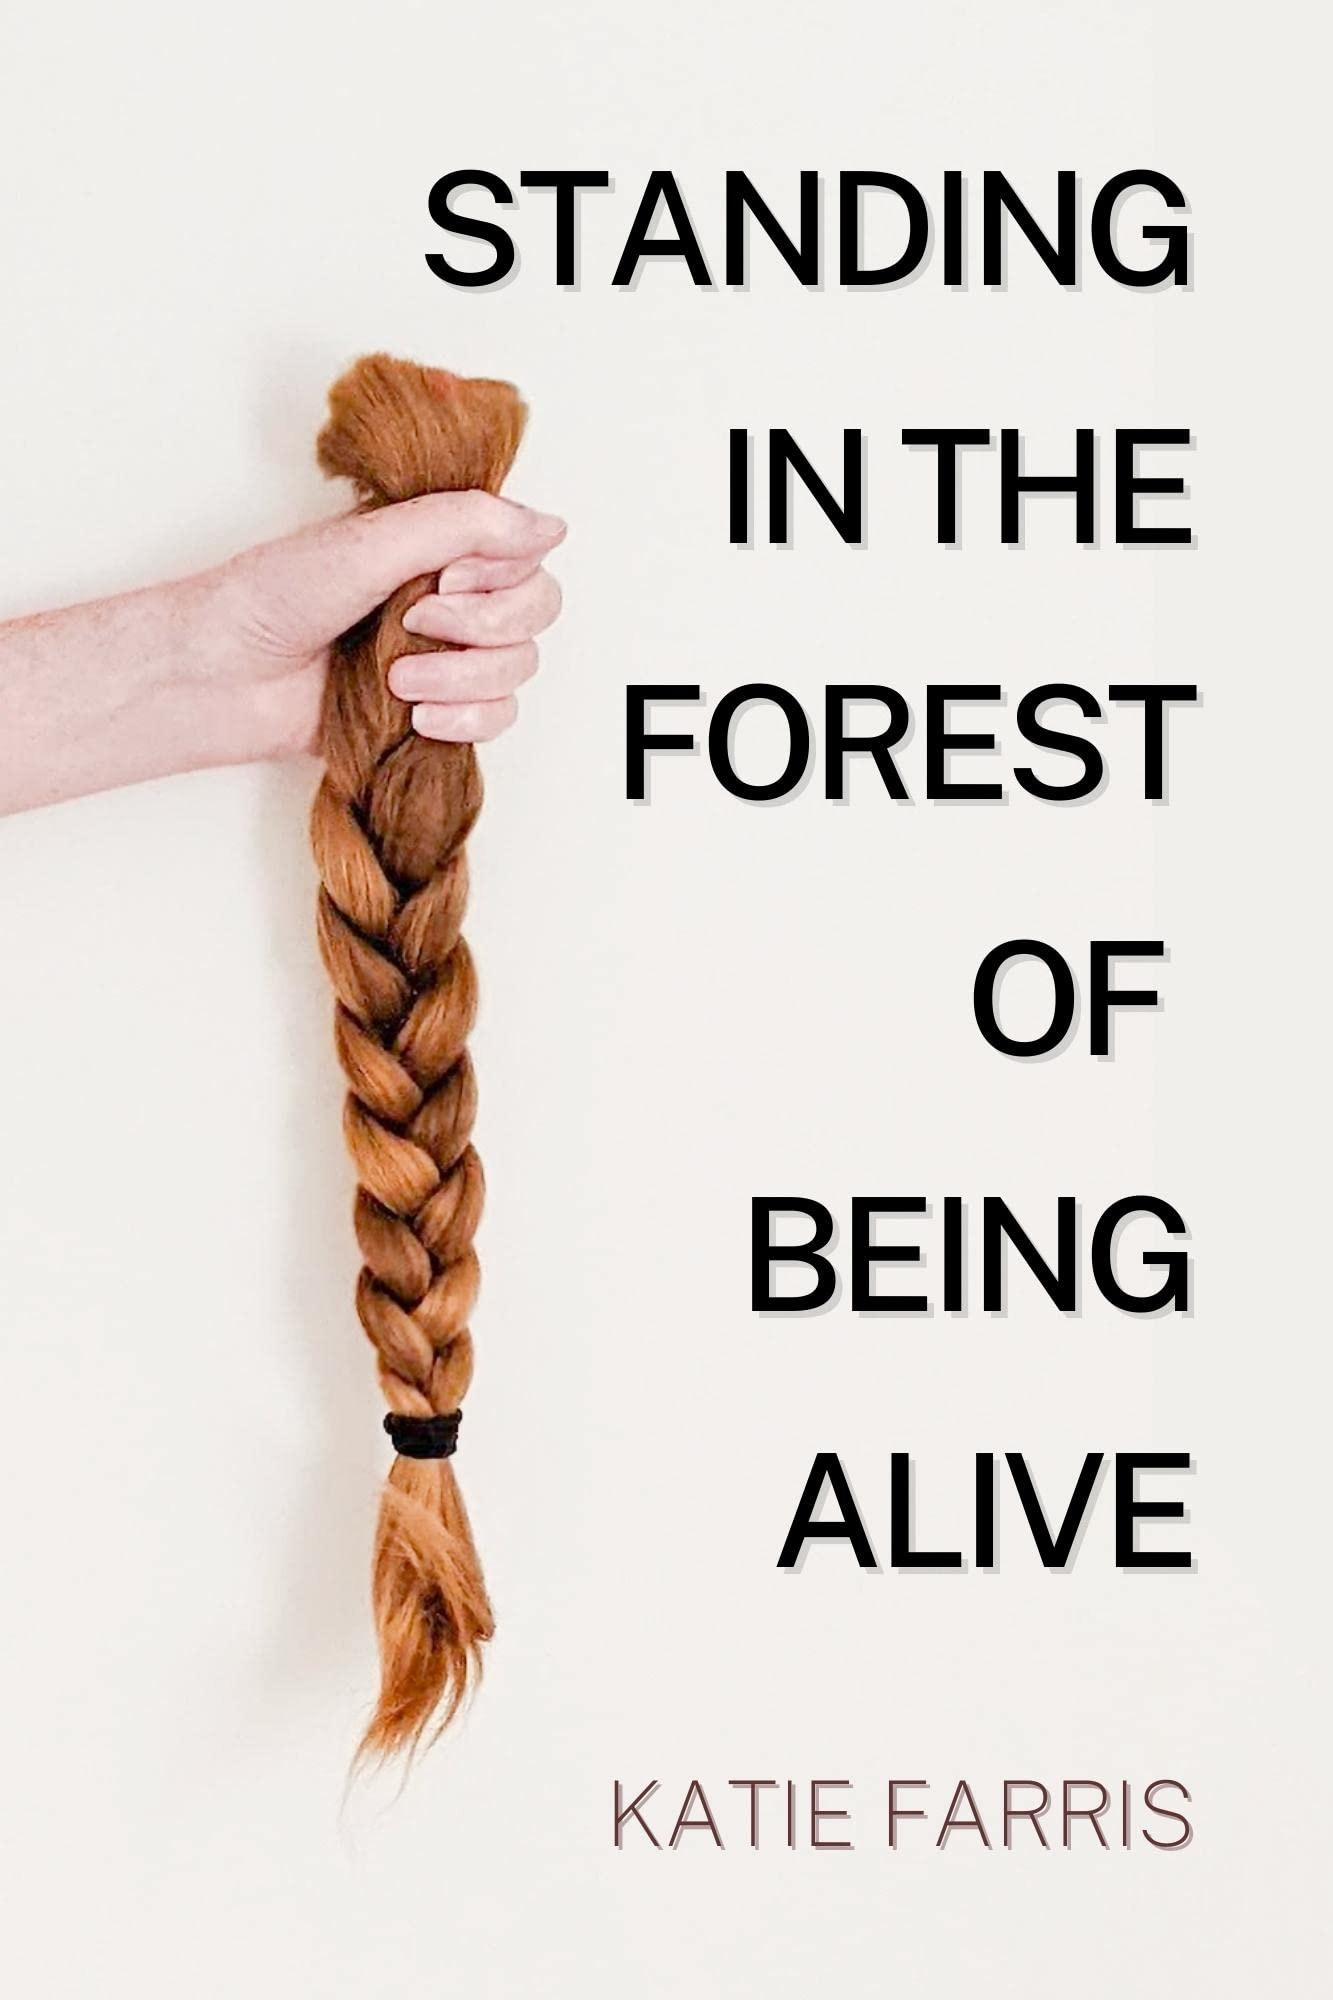 Standing in the Forest of Being Alive by Katie Farris | Goodreads